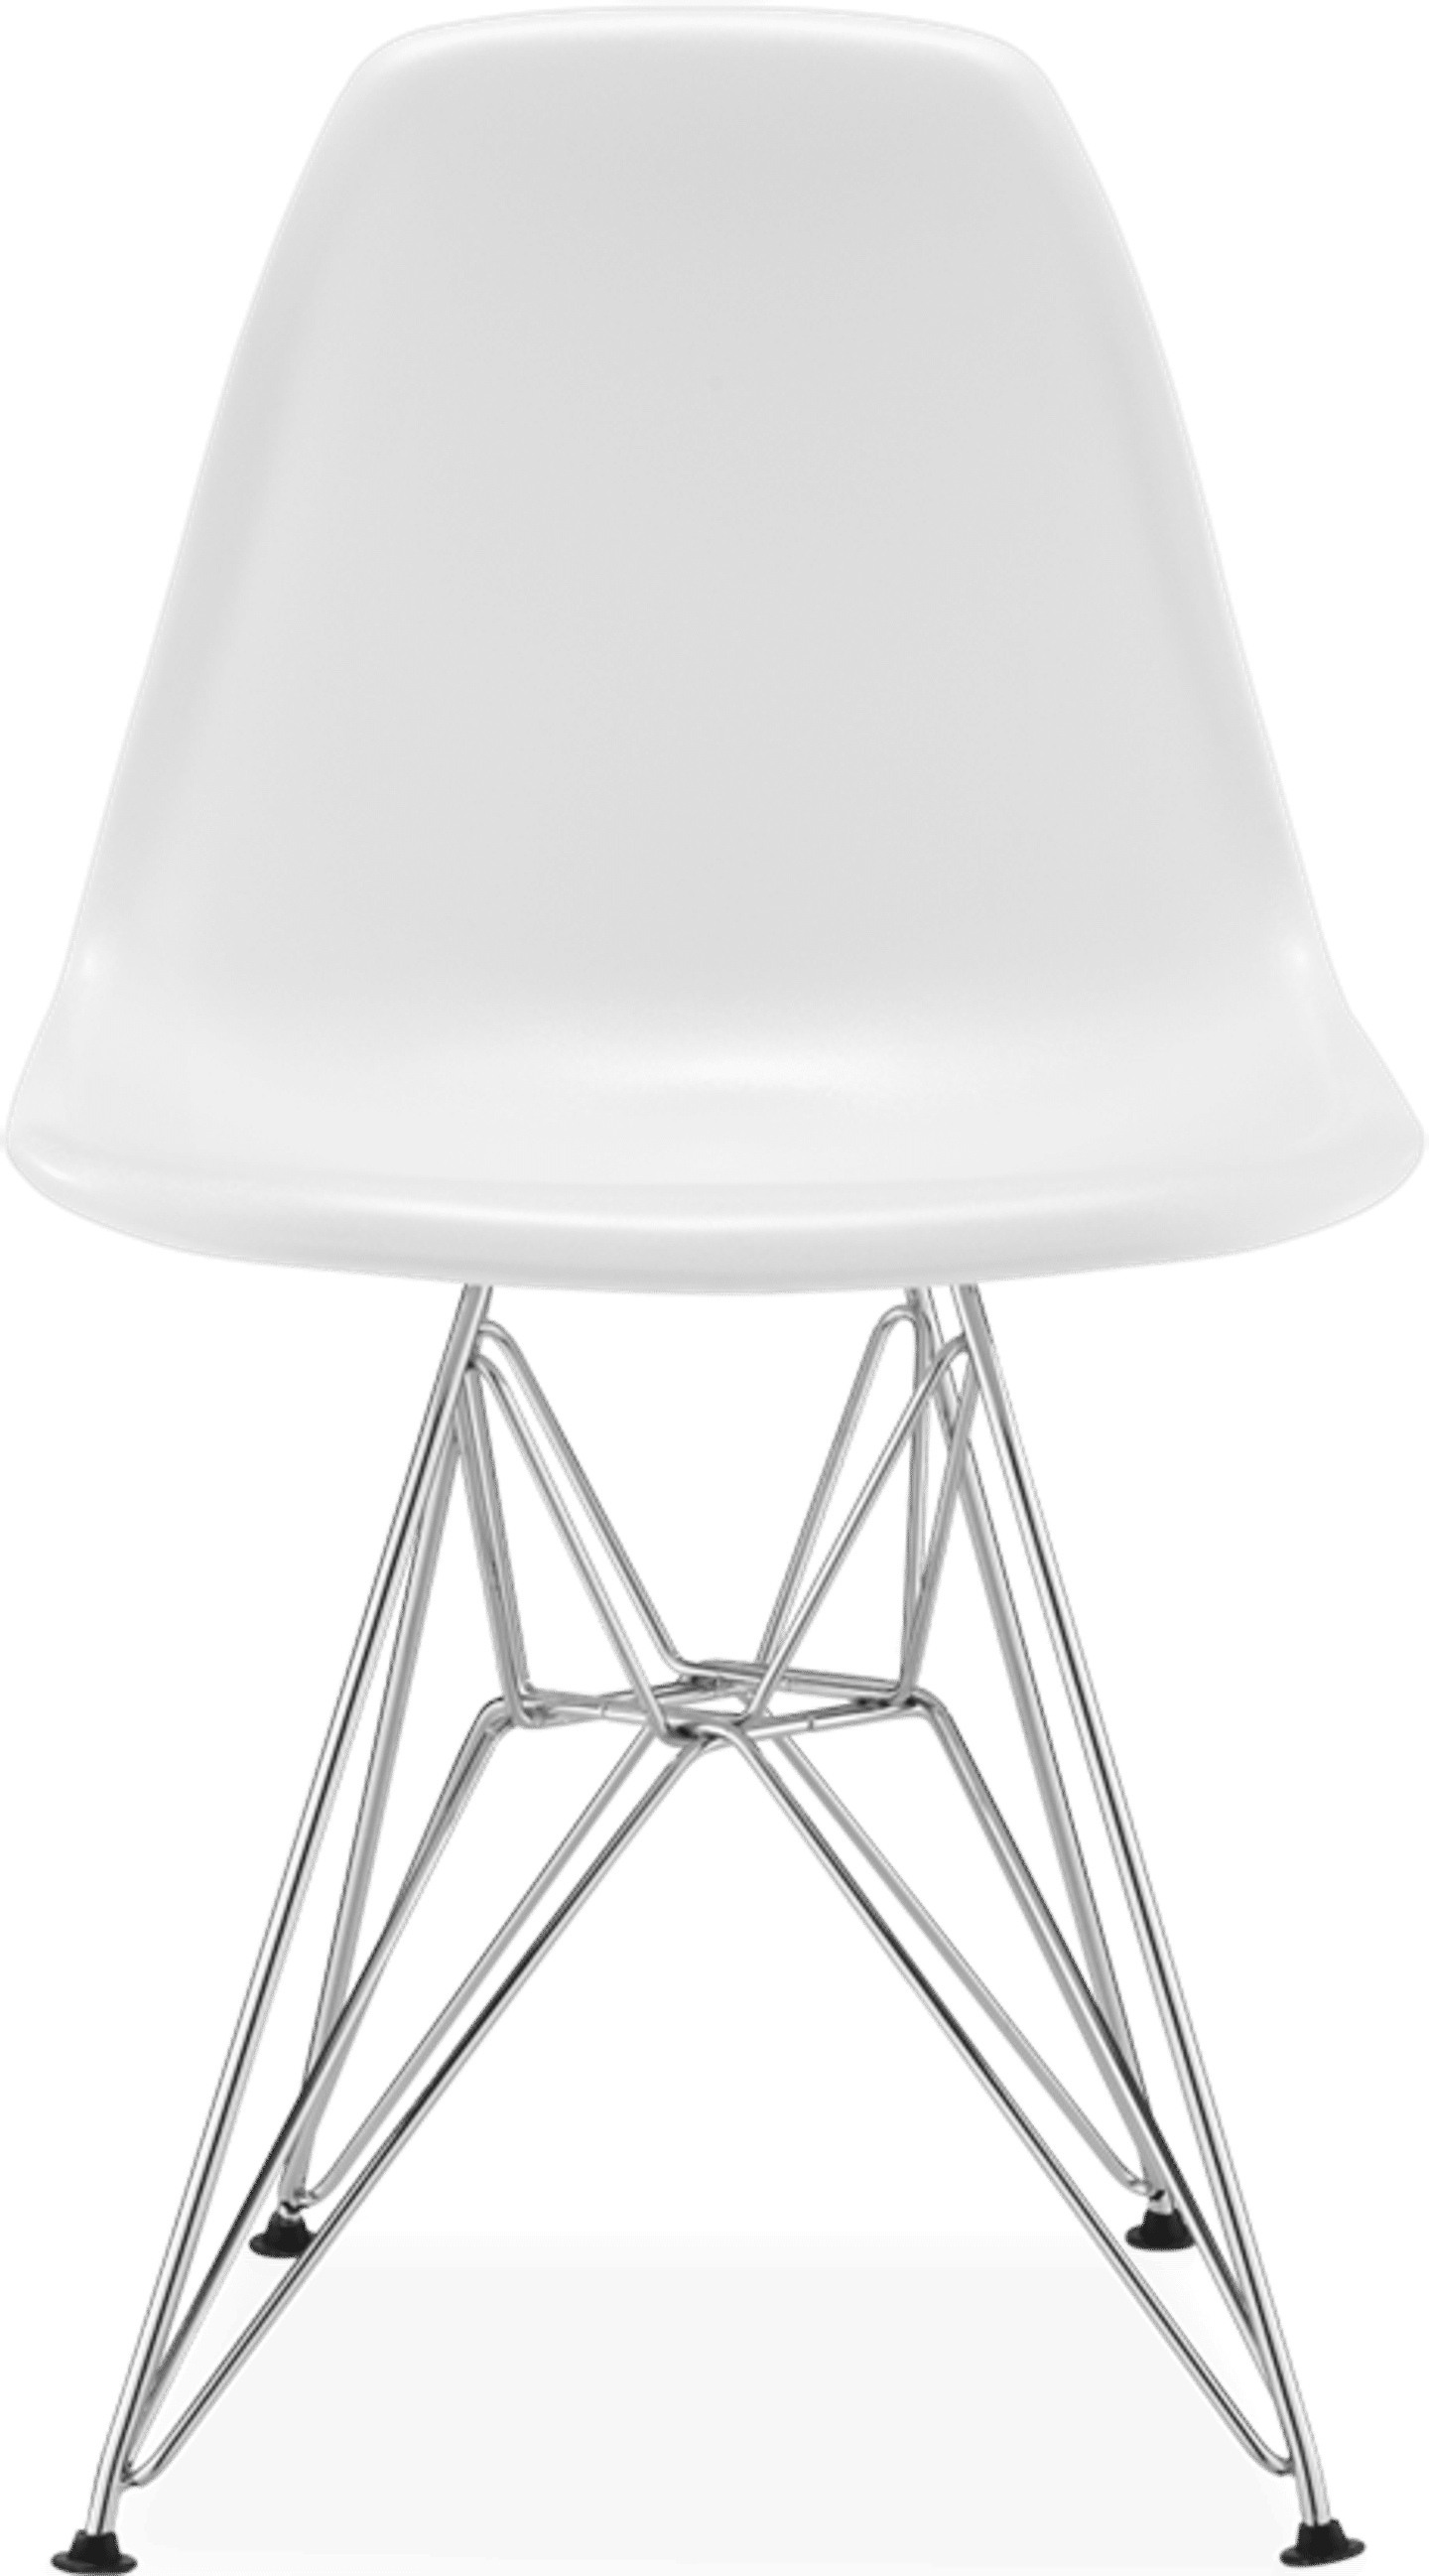 DSR Style Chair White image.